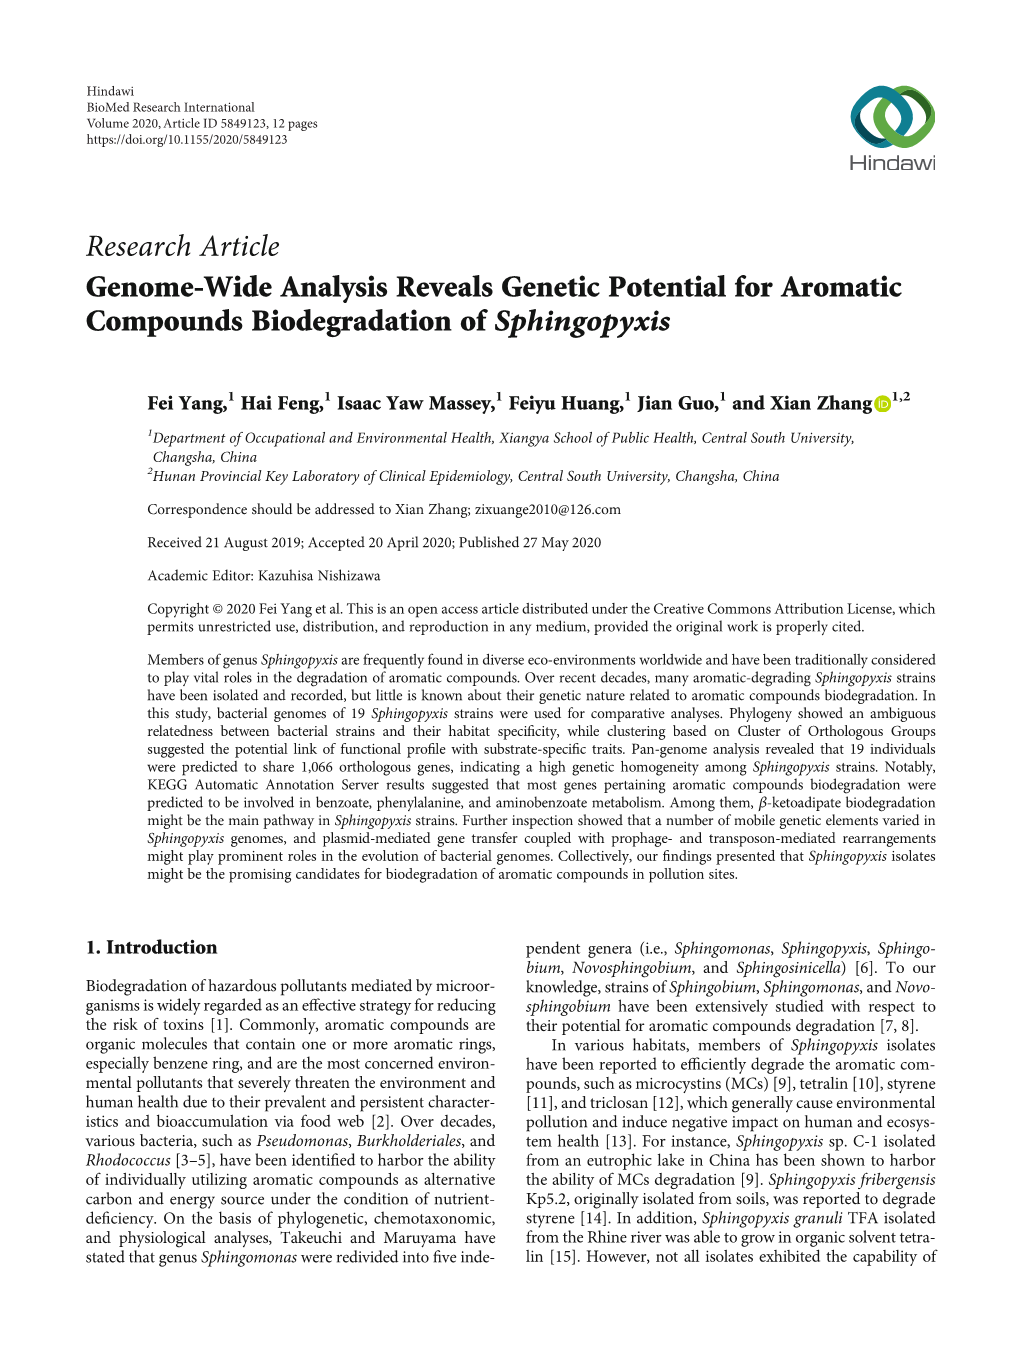 Genome-Wide Analysis Reveals Genetic Potential for Aromatic Compounds Biodegradation of Sphingopyxis